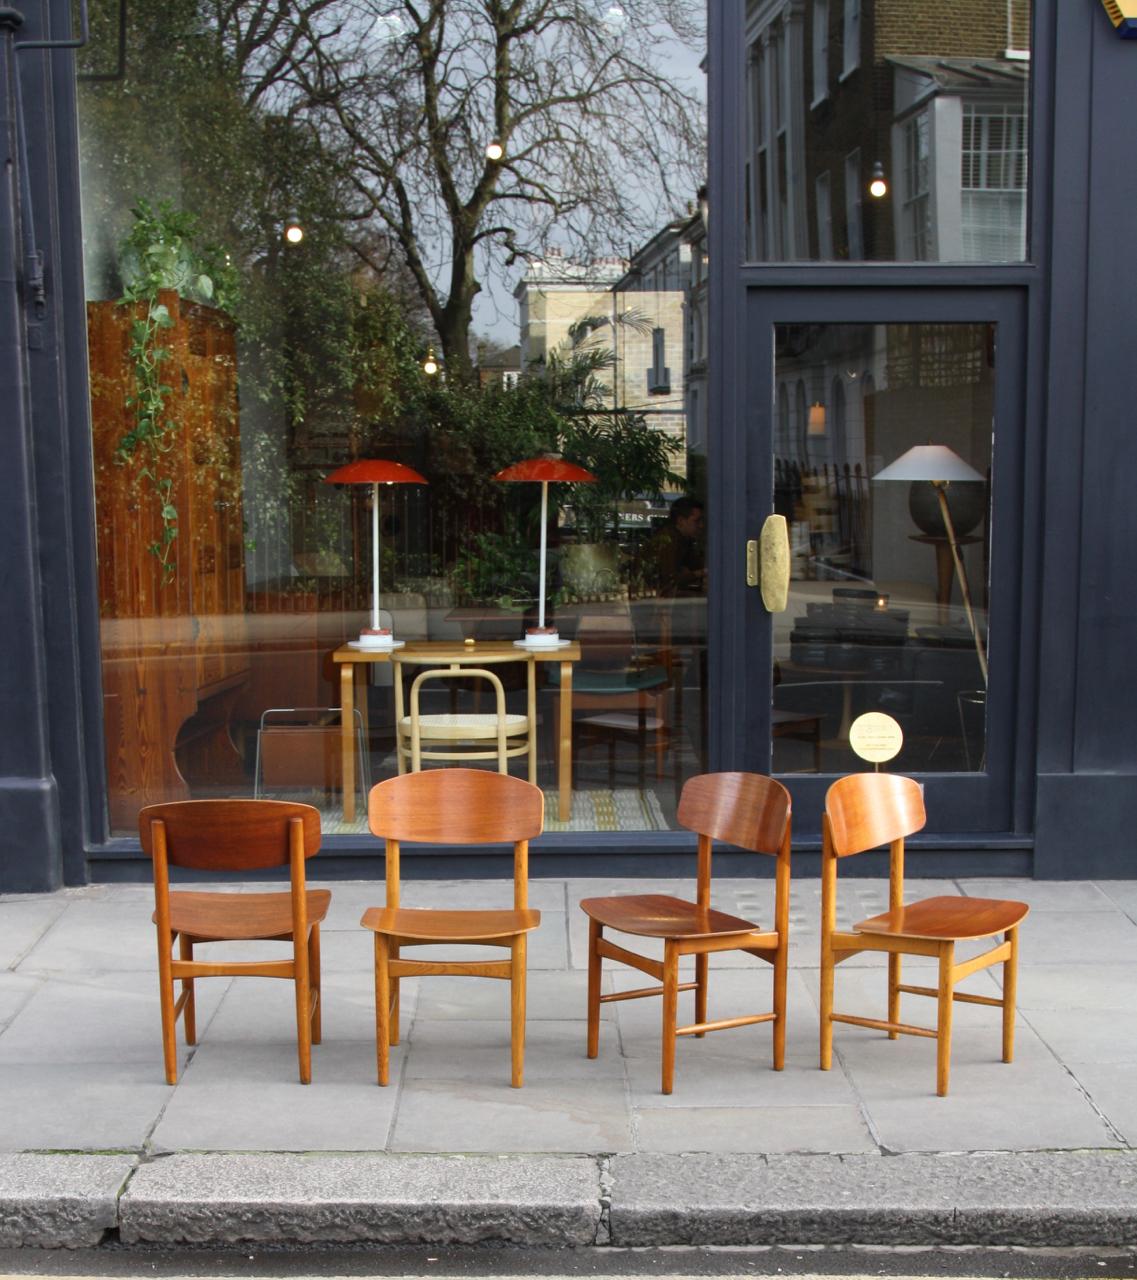 A rare set of eight Model #156 dining chairs designed by Børge Mogensen and made by Søborg Møbelfabrik in 1952. The seat and back rests of the chairs are teak plywood whilst the frames of the chairs are in oak. True to one of the main tenets of